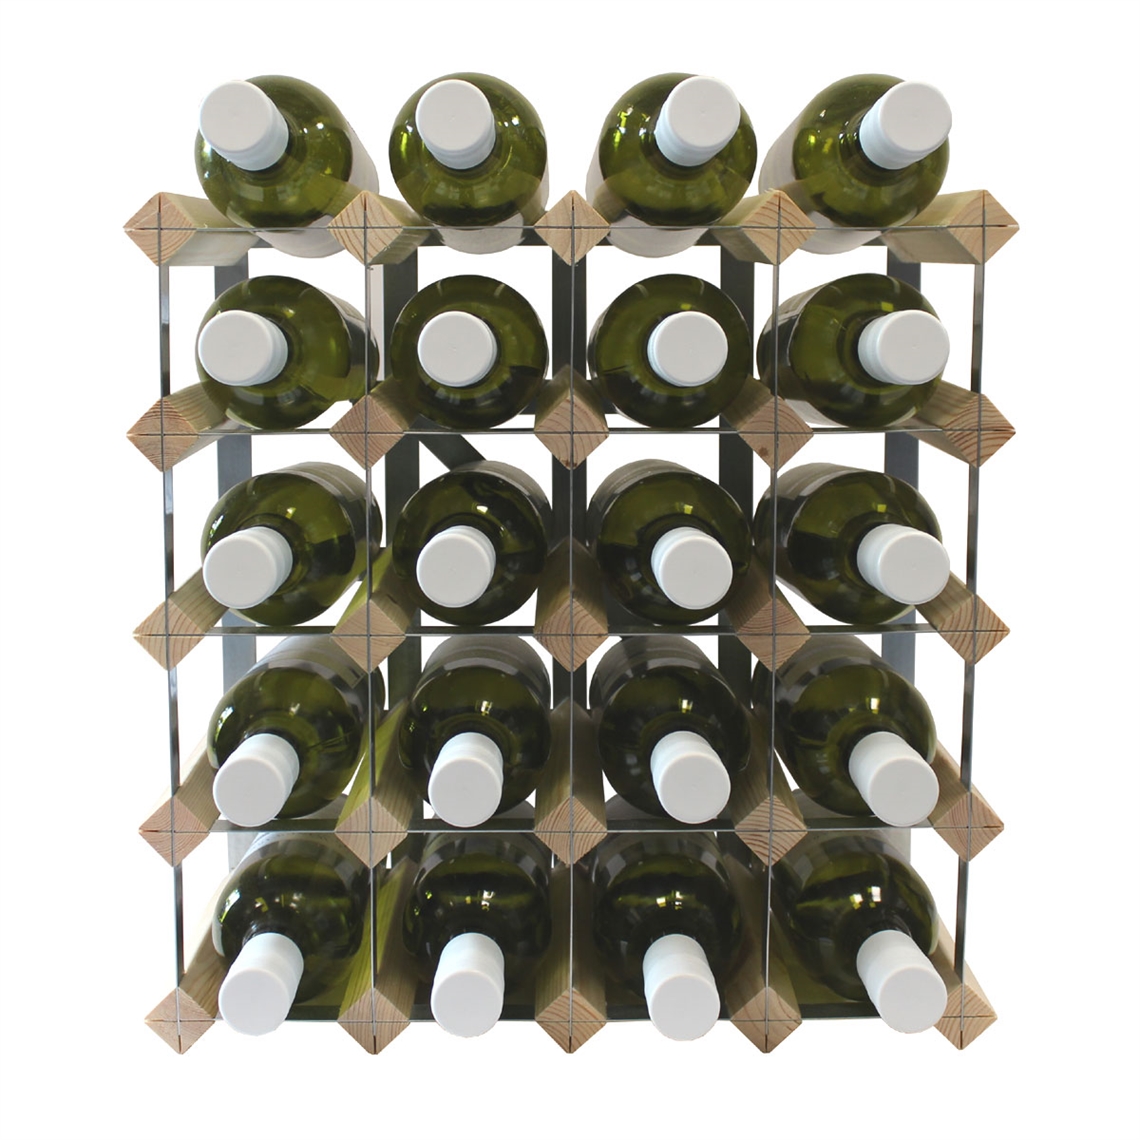 View more nook from our Assembled Wine Racks range